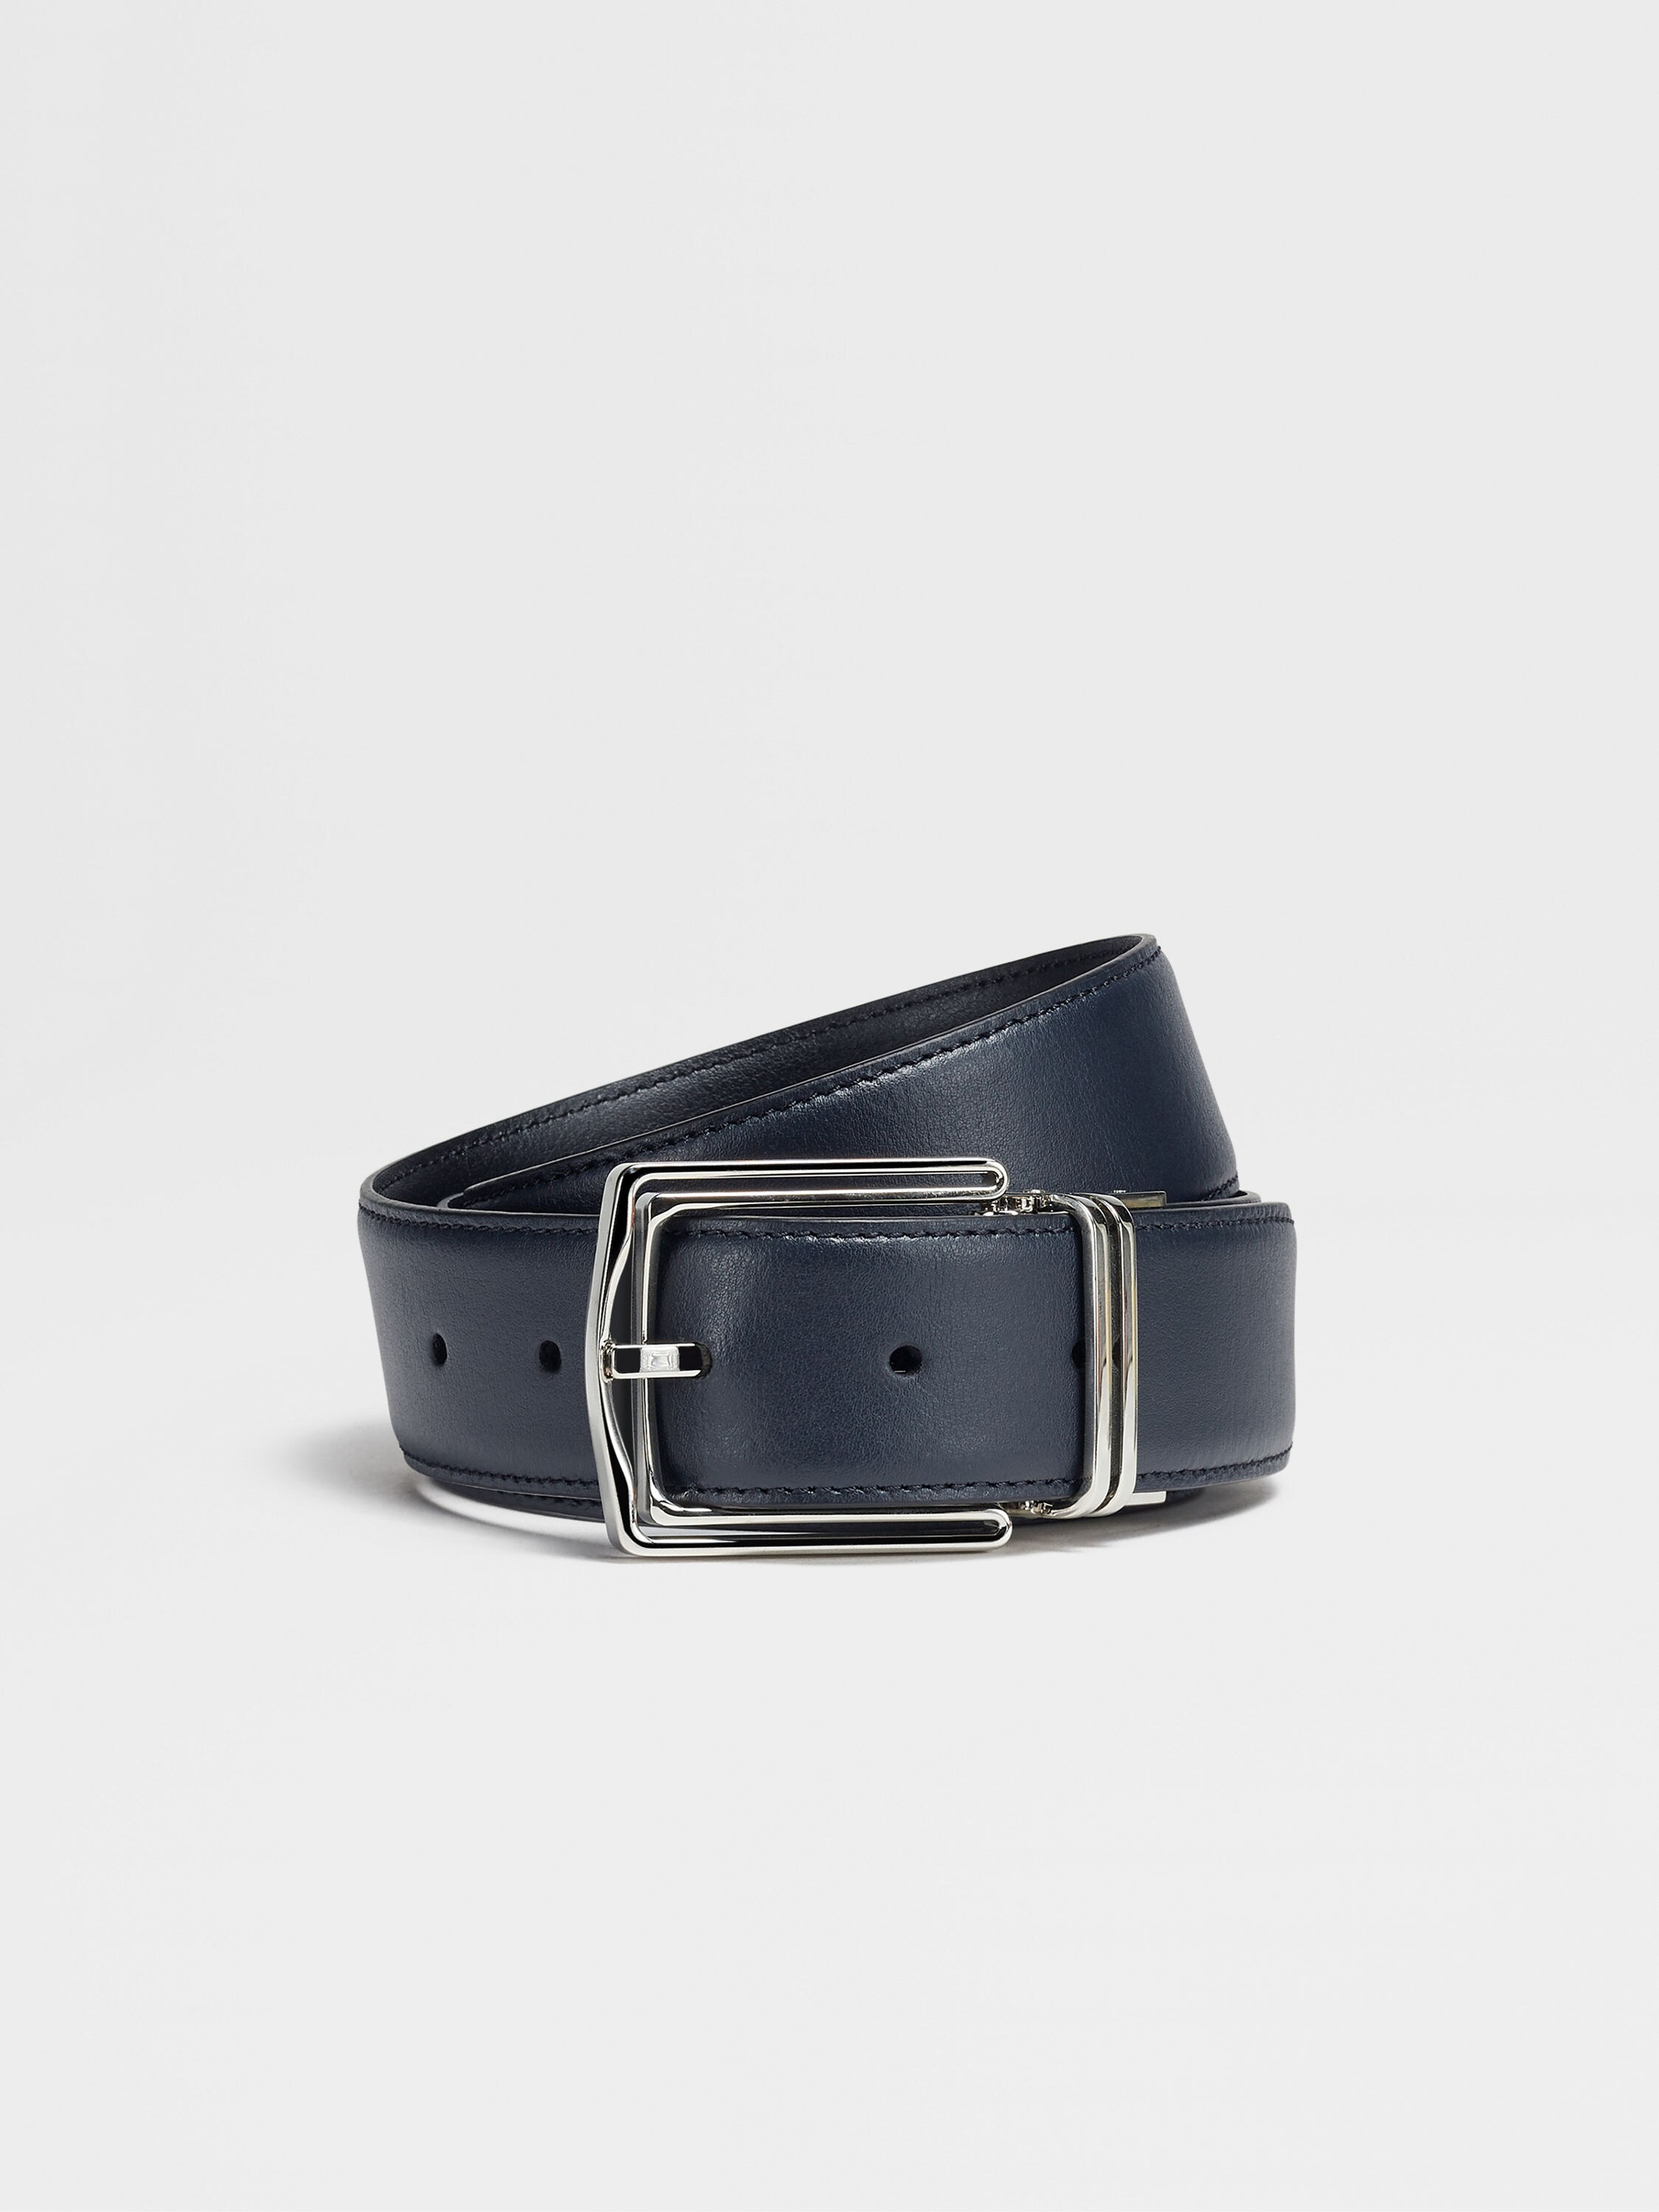 Navy Blue and Black Reversible Leather Belt